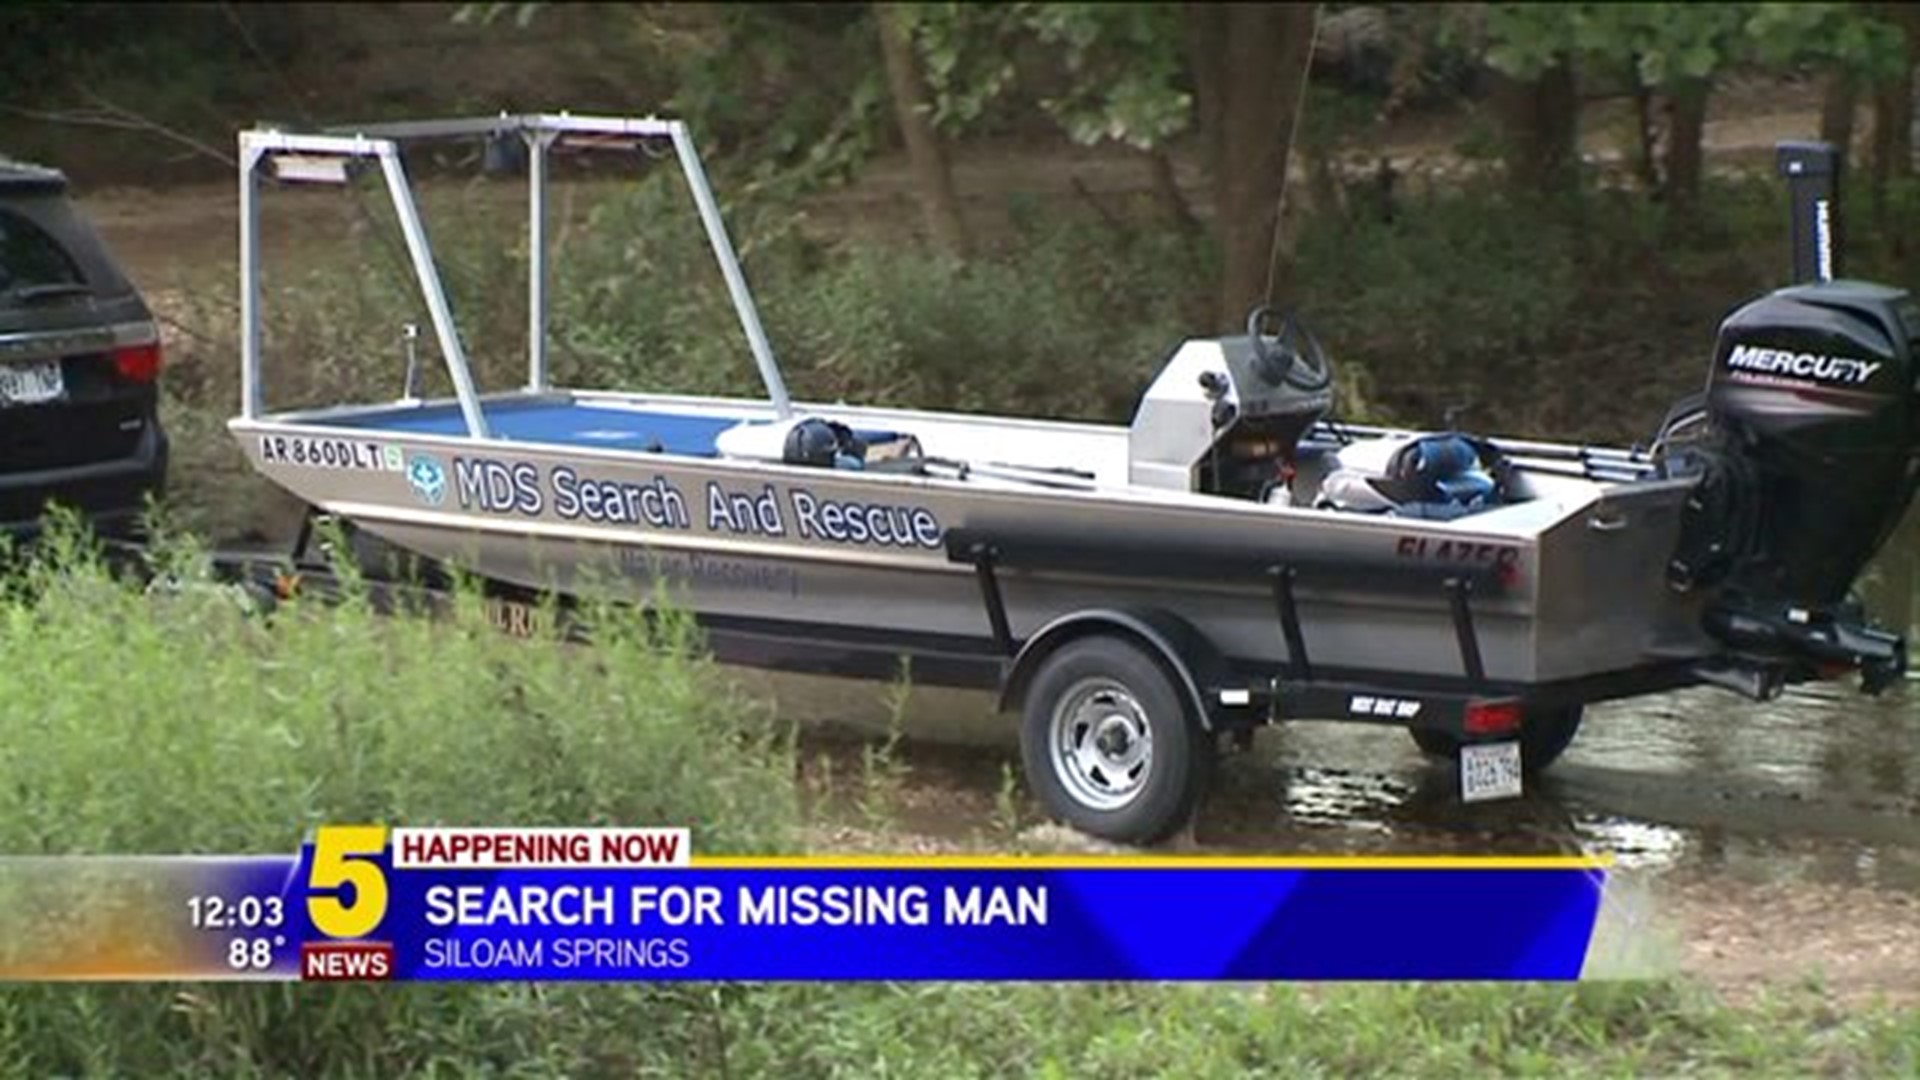 CREWS SEARCH FOR MISSING MAN